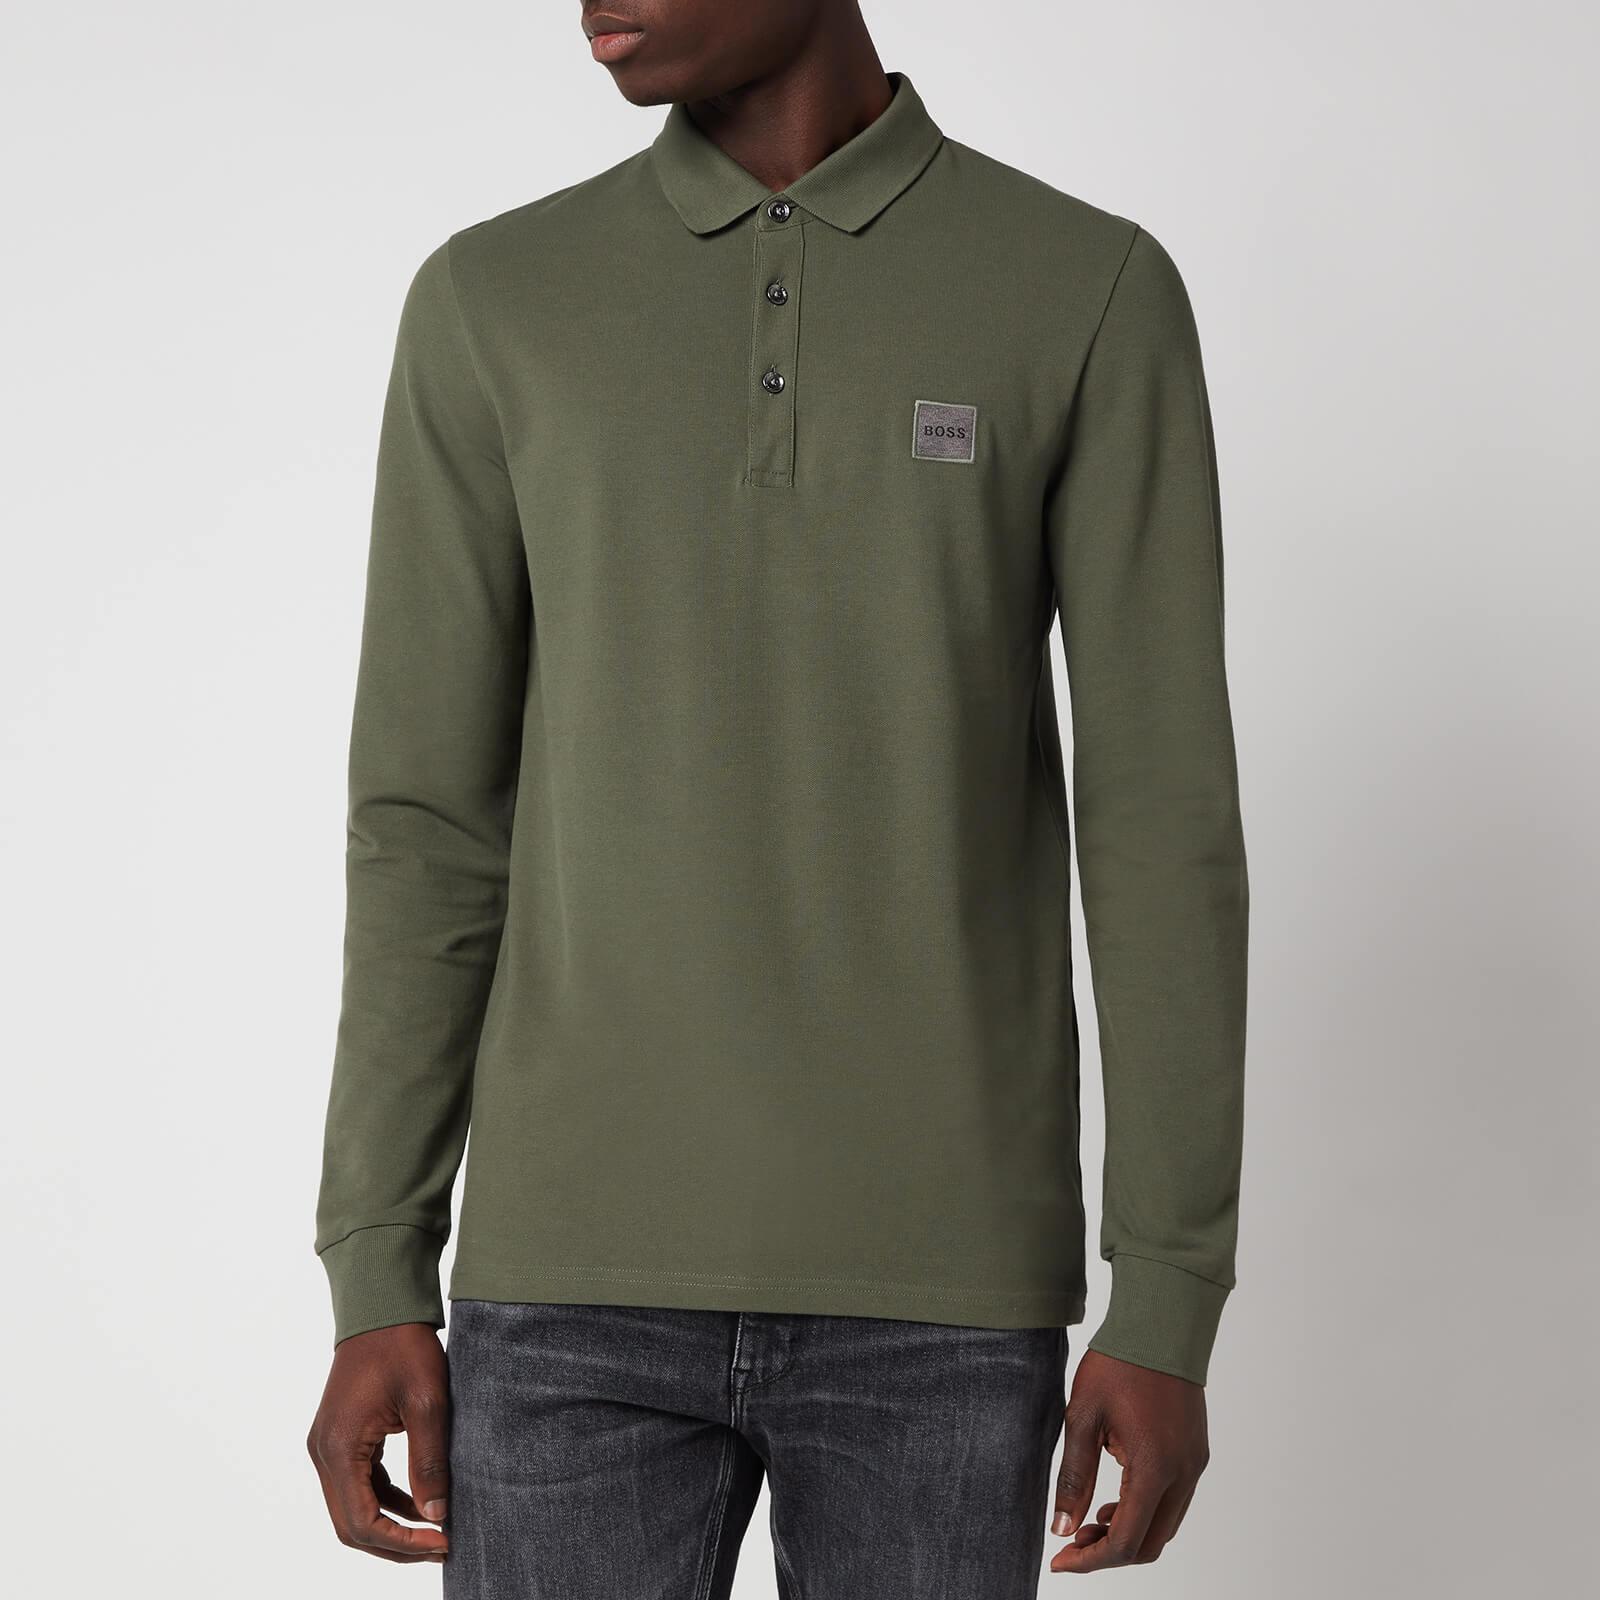 BOSS by HUGO BOSS Cotton Casual Passerby 1 Long Sleeve Polo Shirt in Green  for Men - Lyst